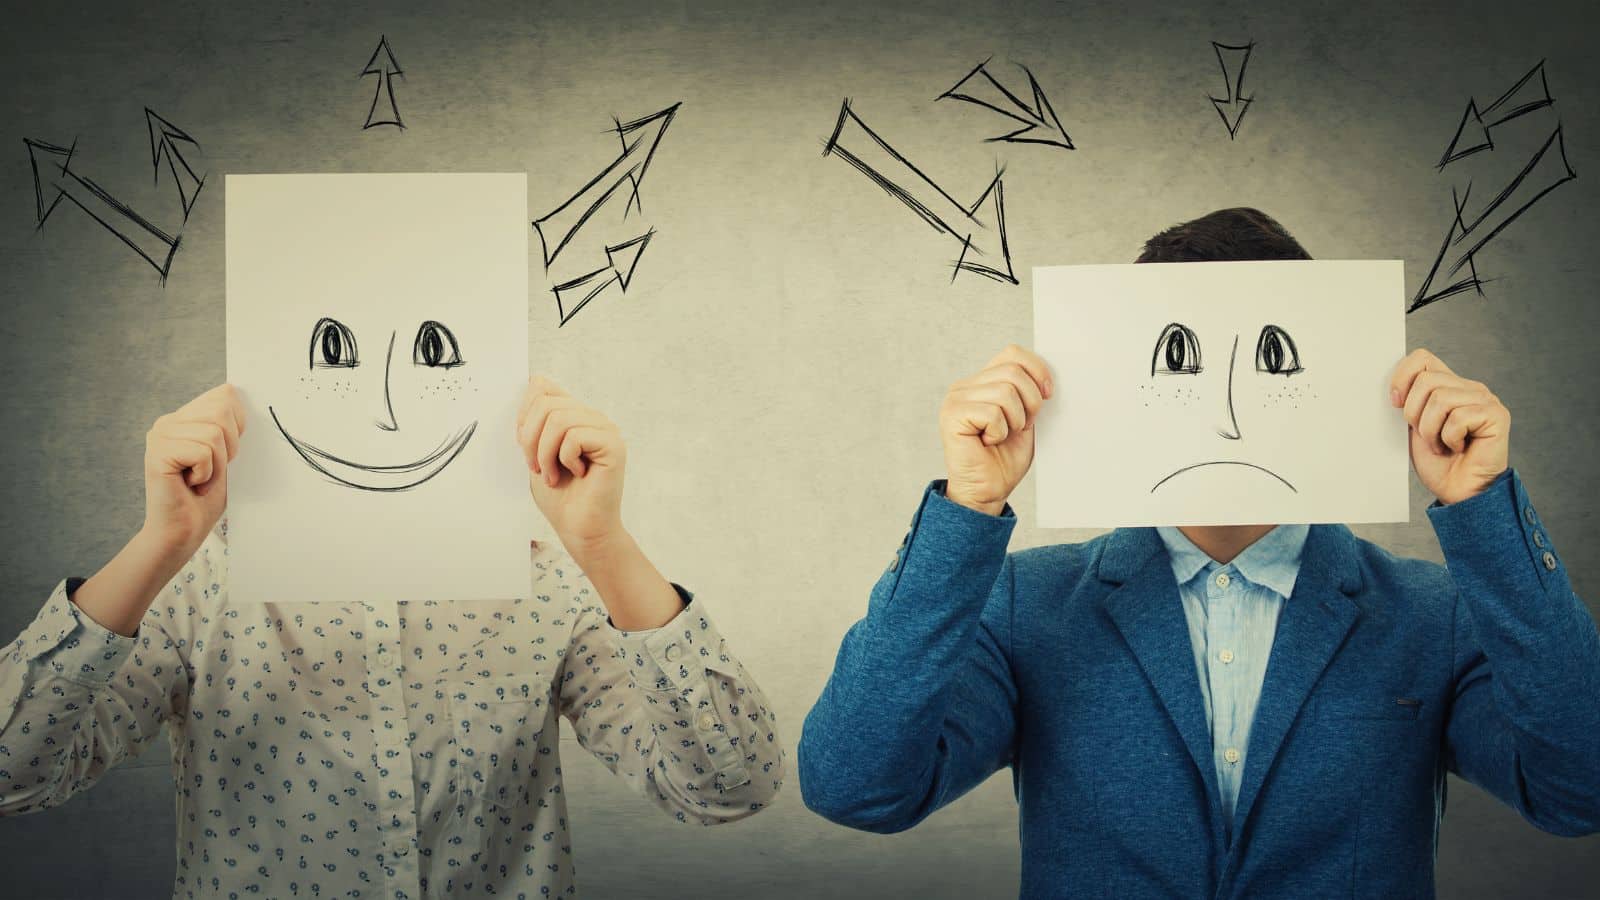 Two people holding up sheets of paper in front of their faces - one has a drawing of a smiley face and one is a sad face